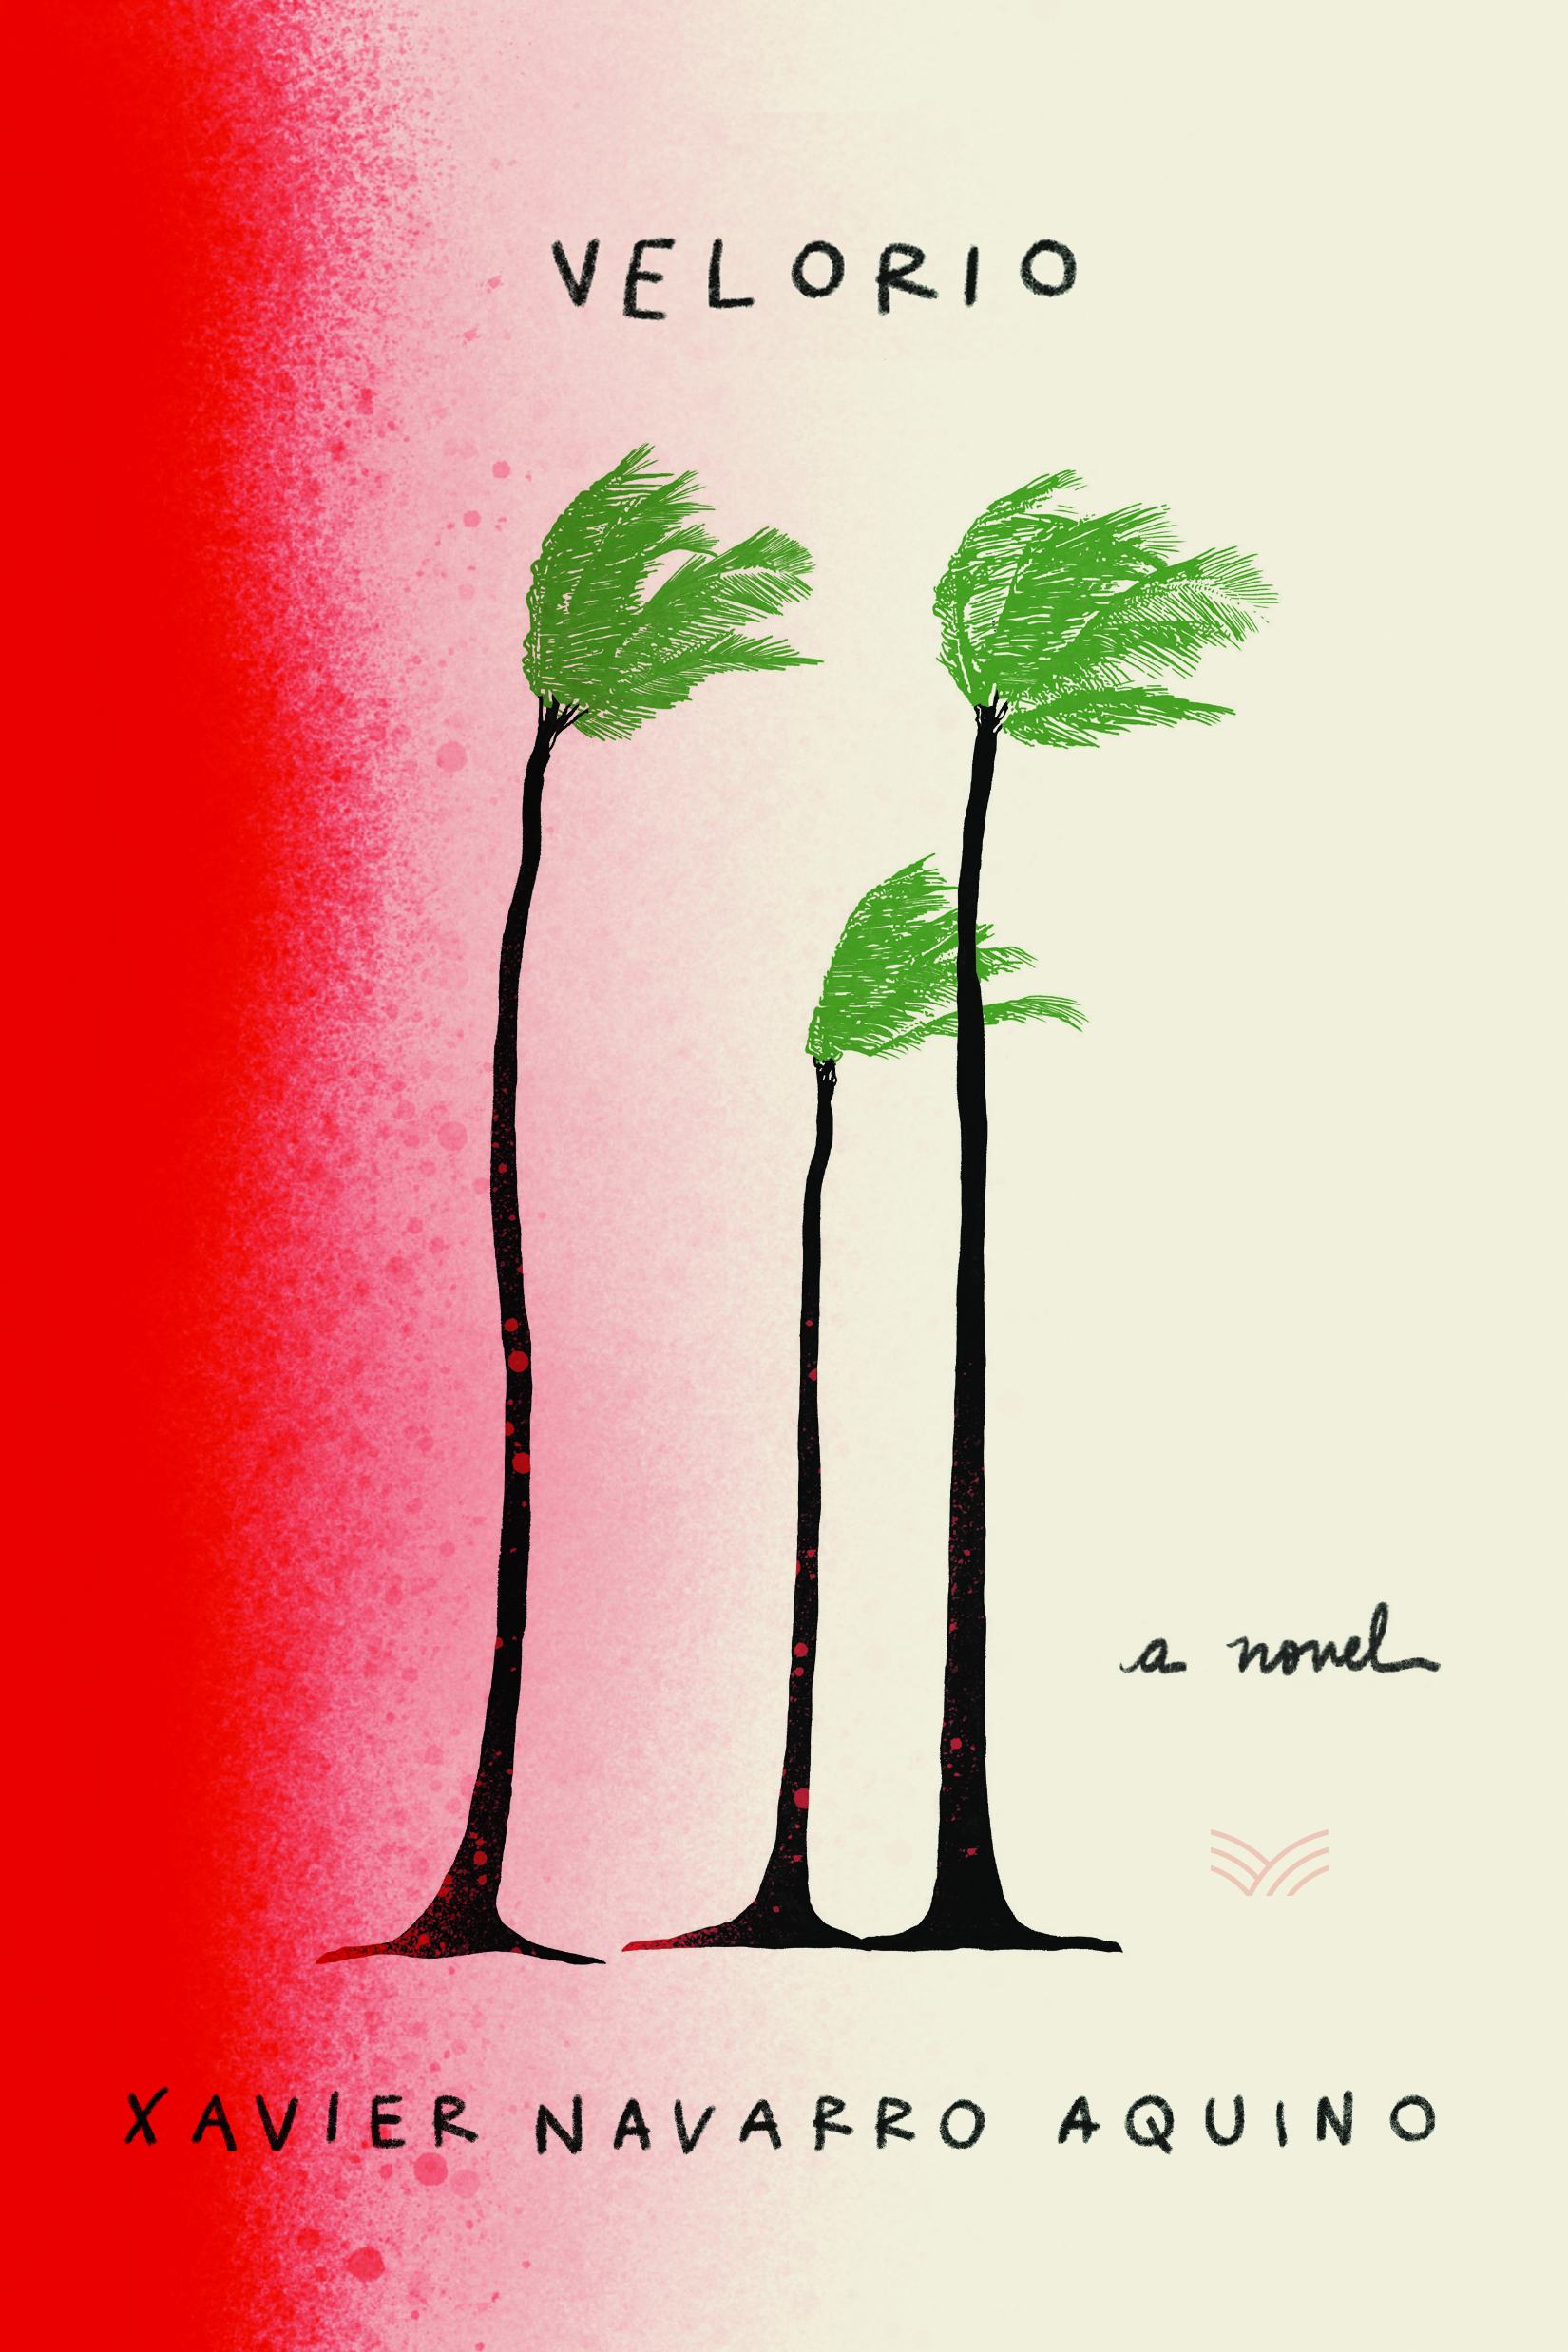 Cover of Velorio by Xavier Navarro Aquino, which shows a red stripe of paint next to a drawing of palm trees blowing in the wind